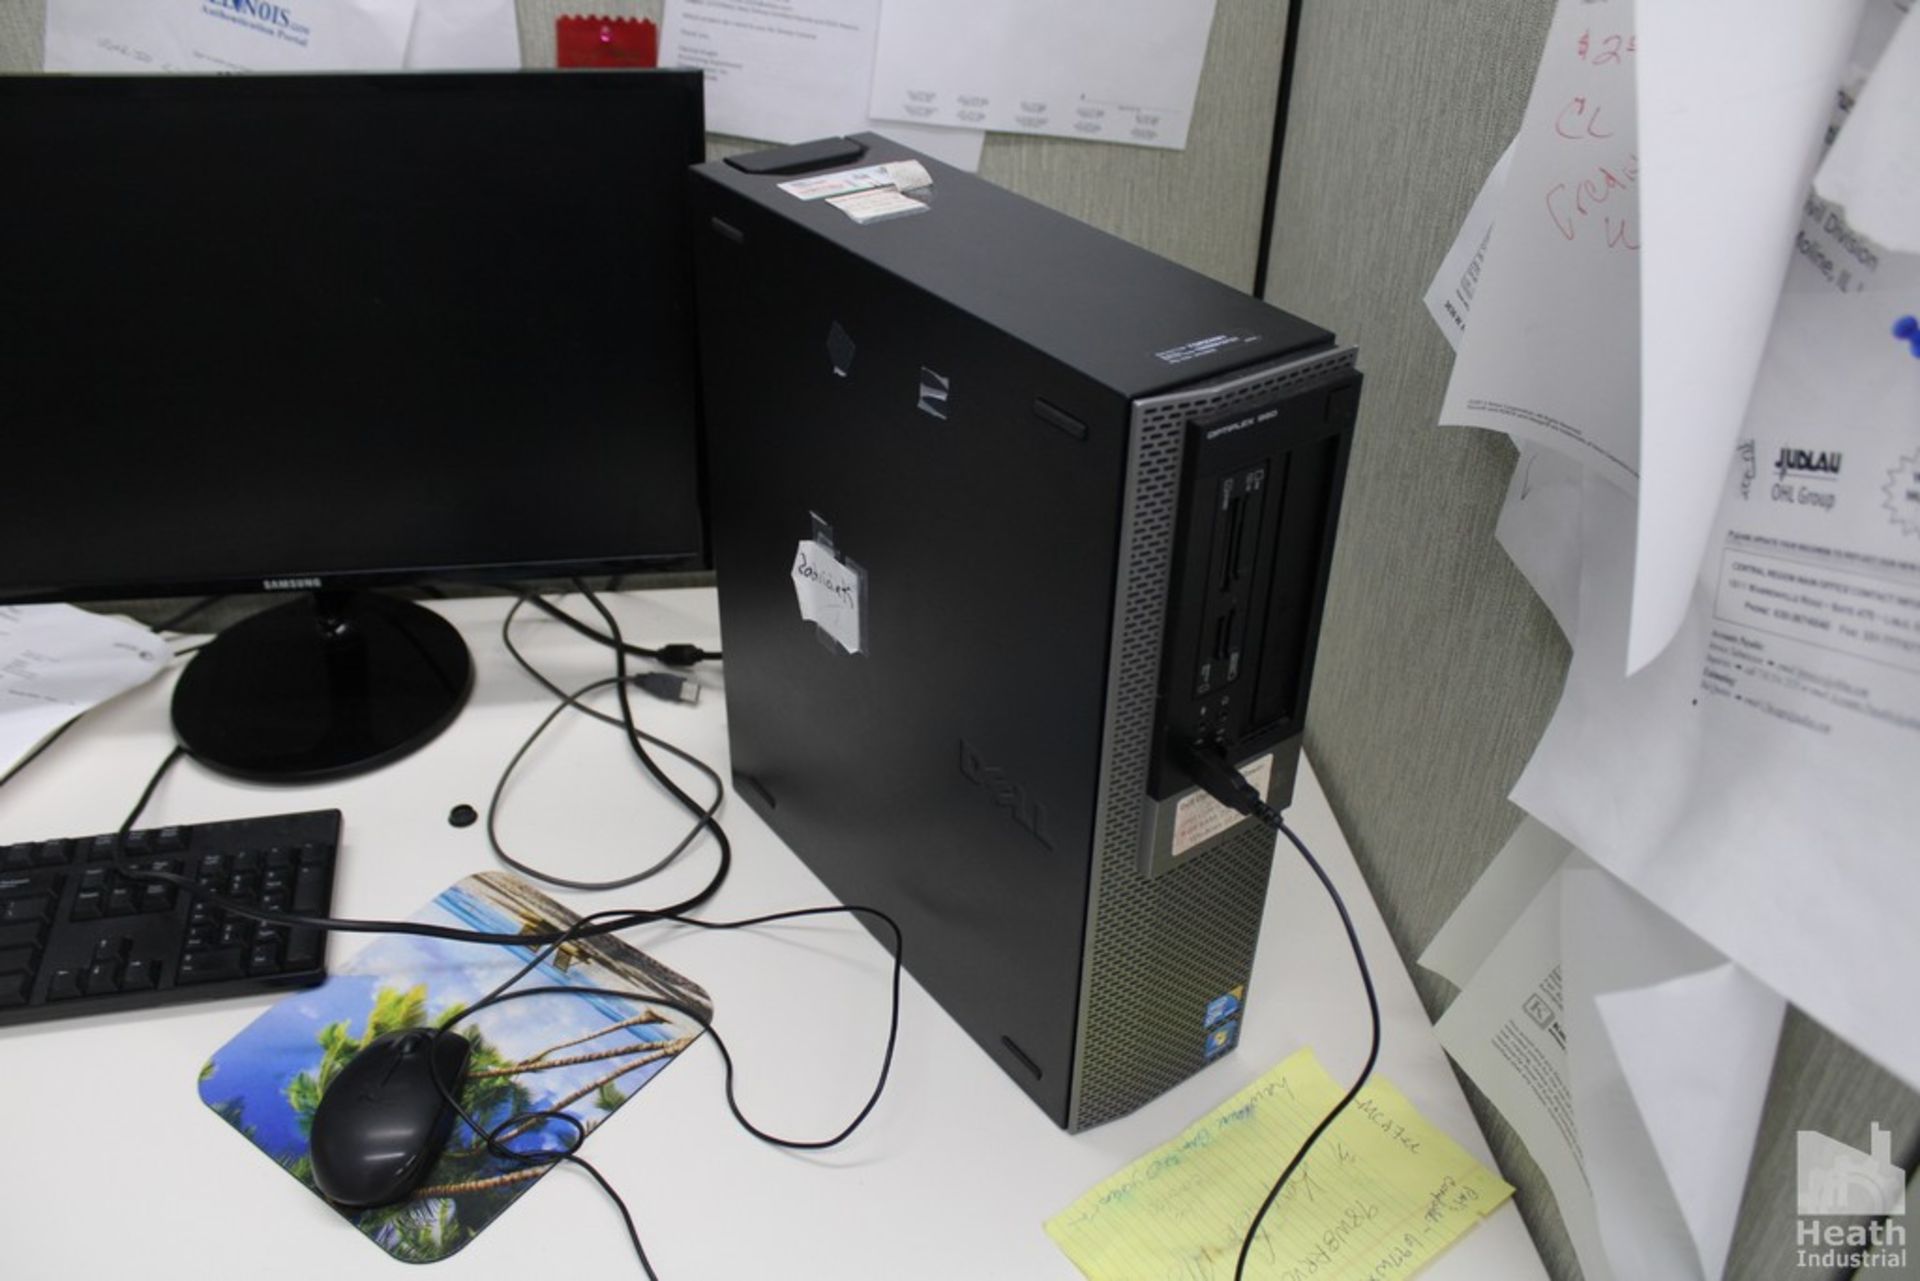 DELL OPTIPLEX 980 TOWER WITH TWO MONITORS, KEYBOARD AND MOUSE - Image 2 of 3